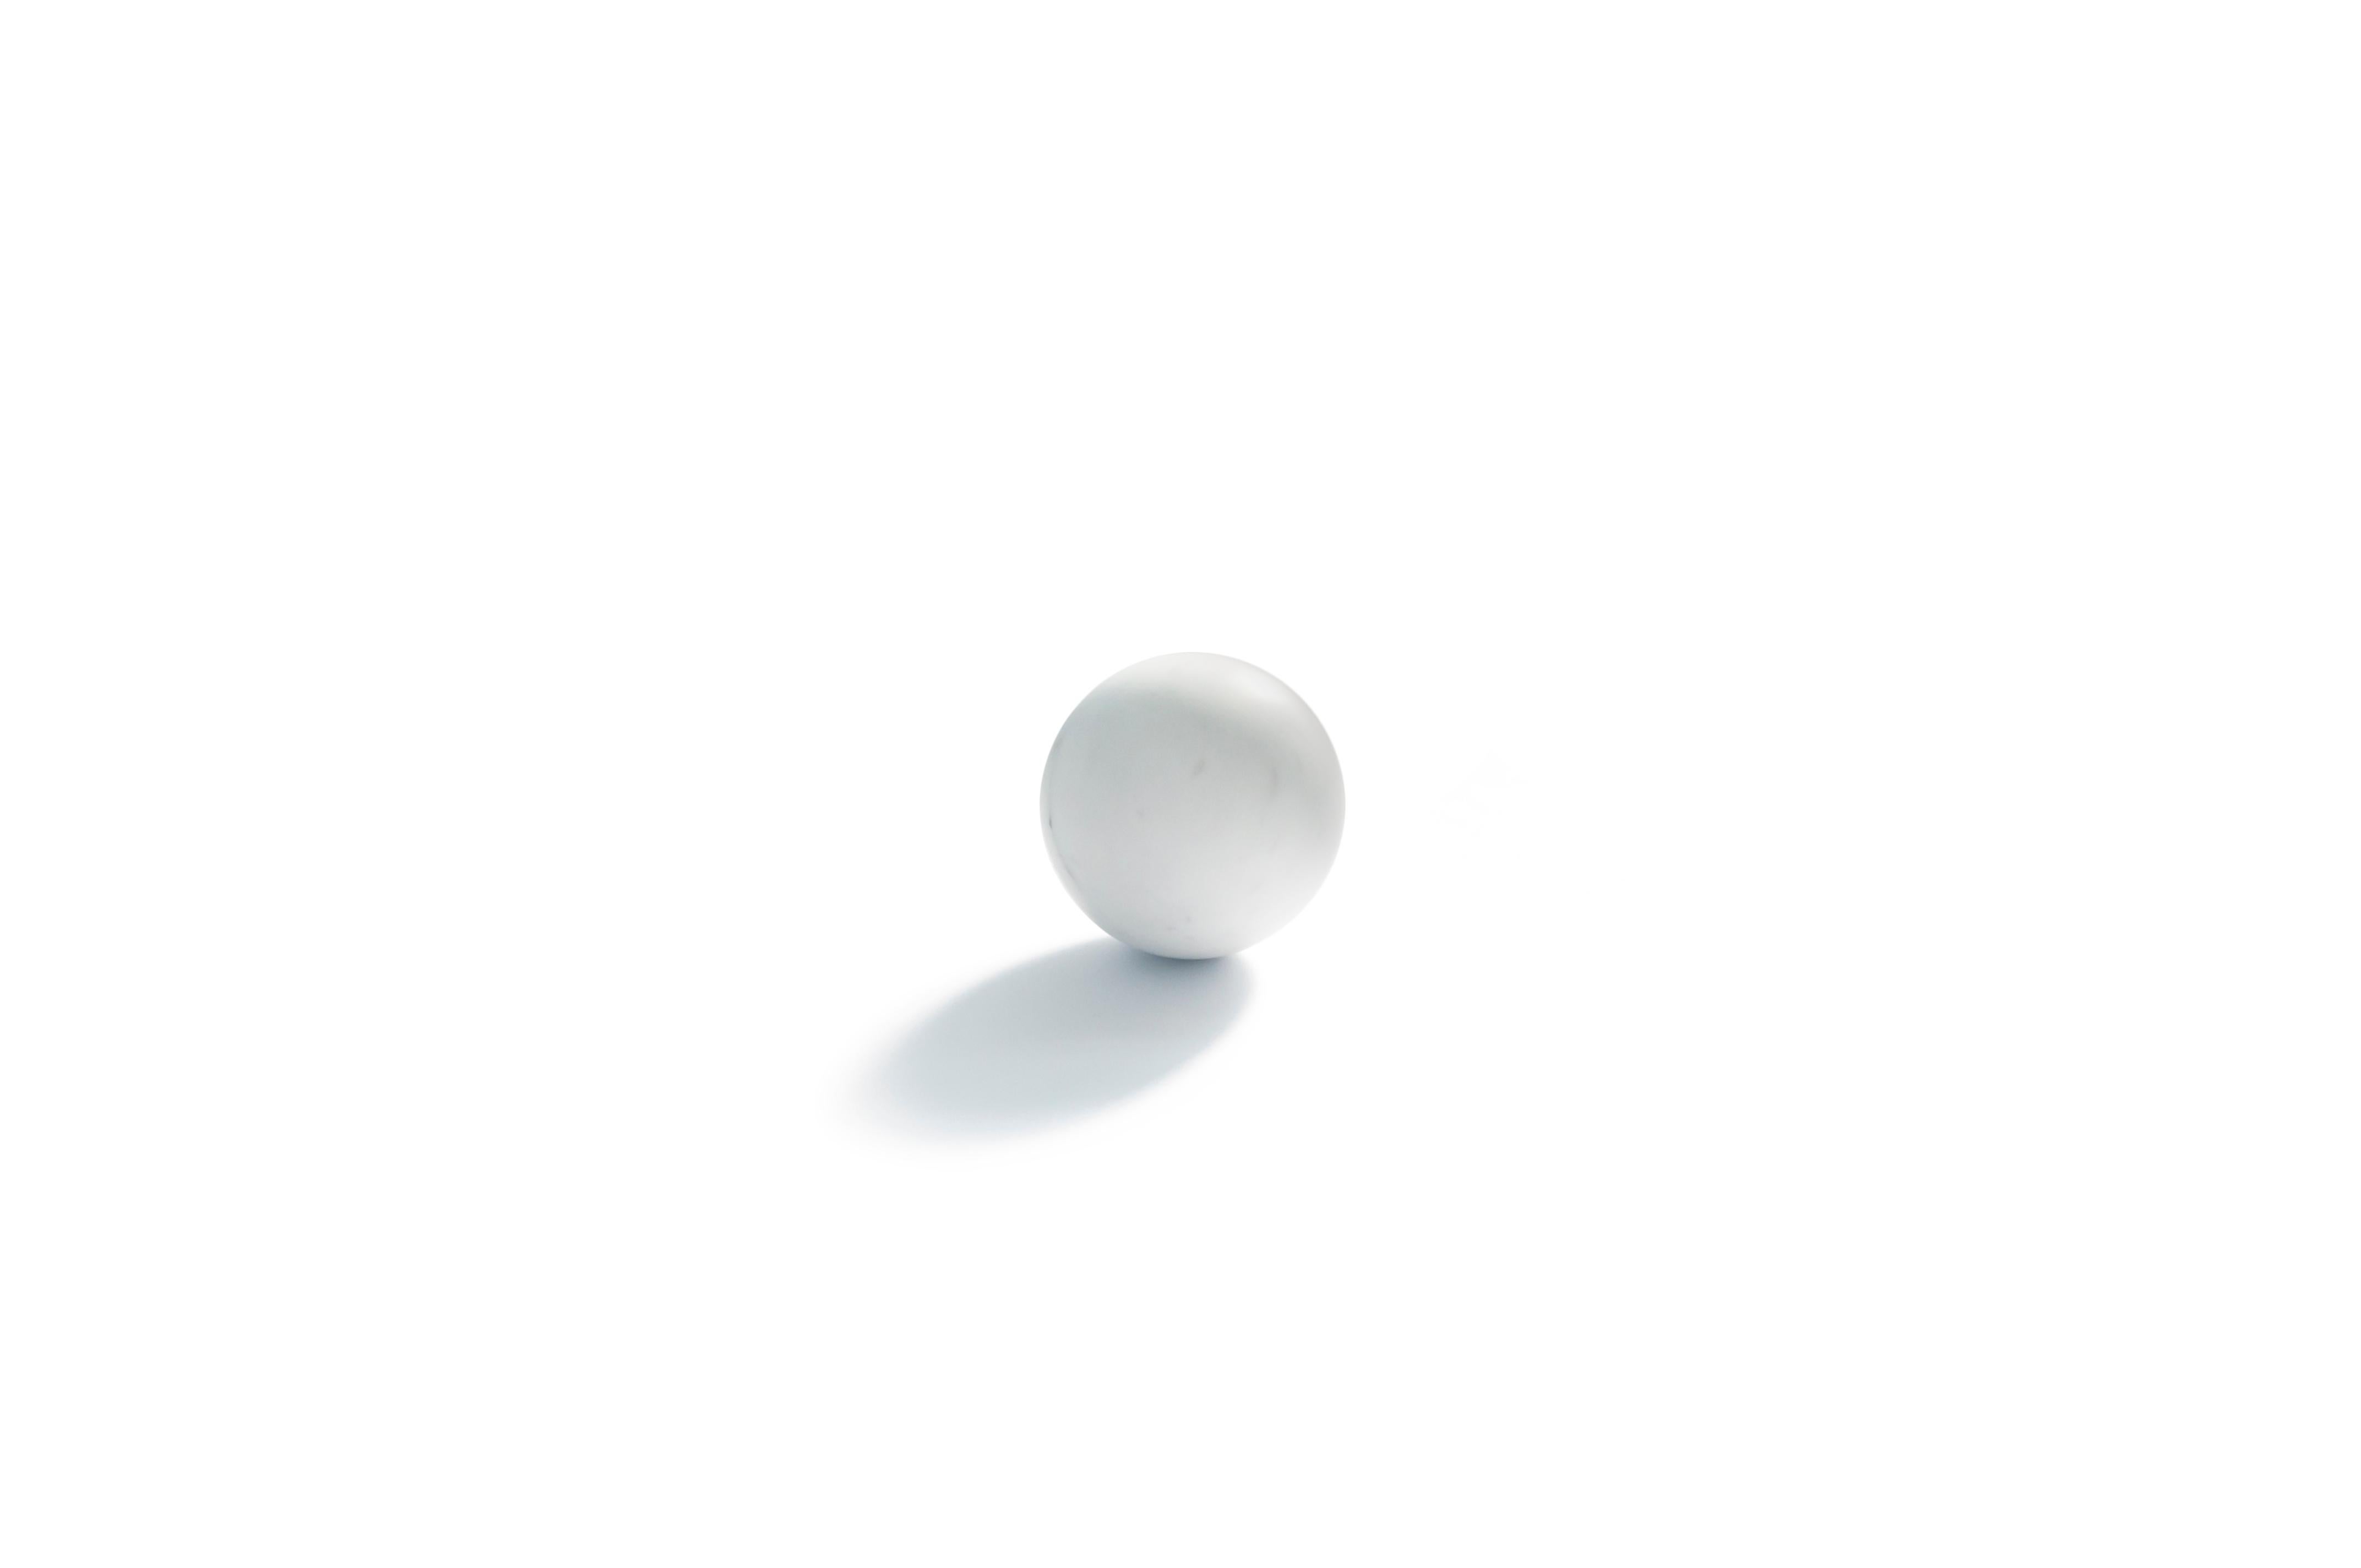 Paperweight with sphere shape in satin white Carrara marble. Measure: Diameter 10,5 cm

Each piece is in a way unique (since each marble block is different in veins and shades) and handcrafted in Italy. Slight variations in shape, color and size